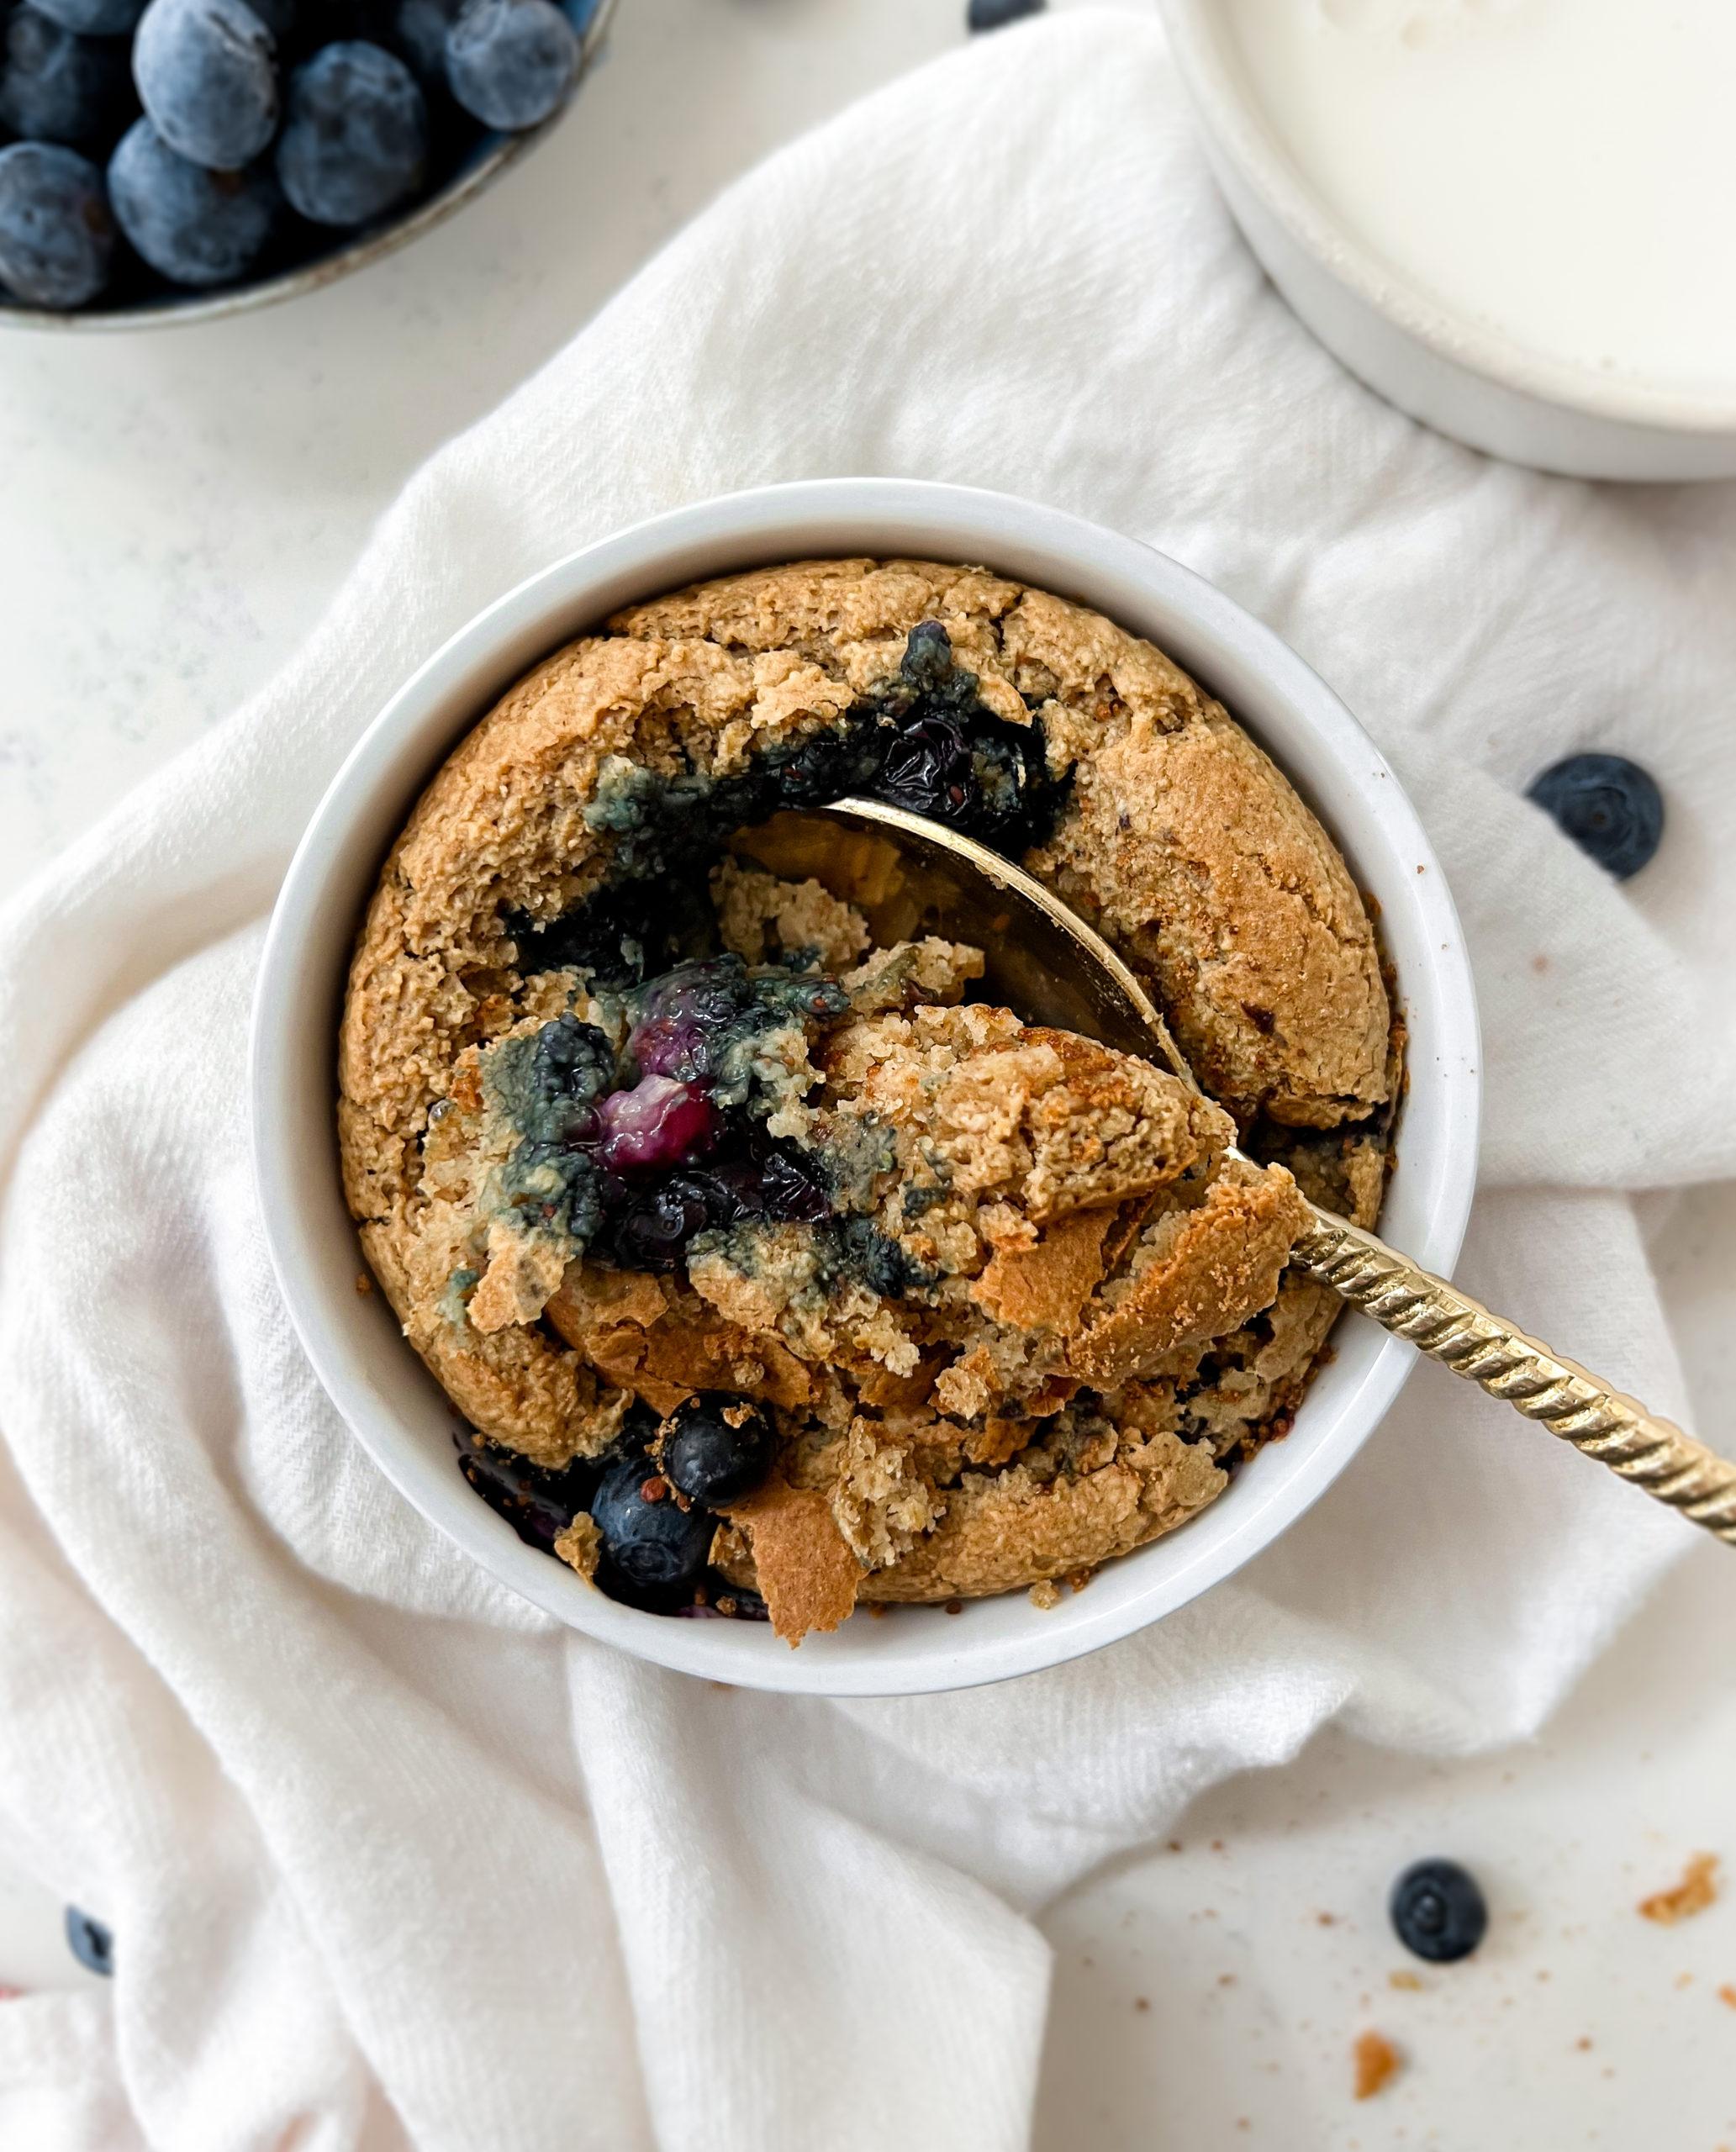 baked oats in a ramekin next to a glass of milk and bowl of berries